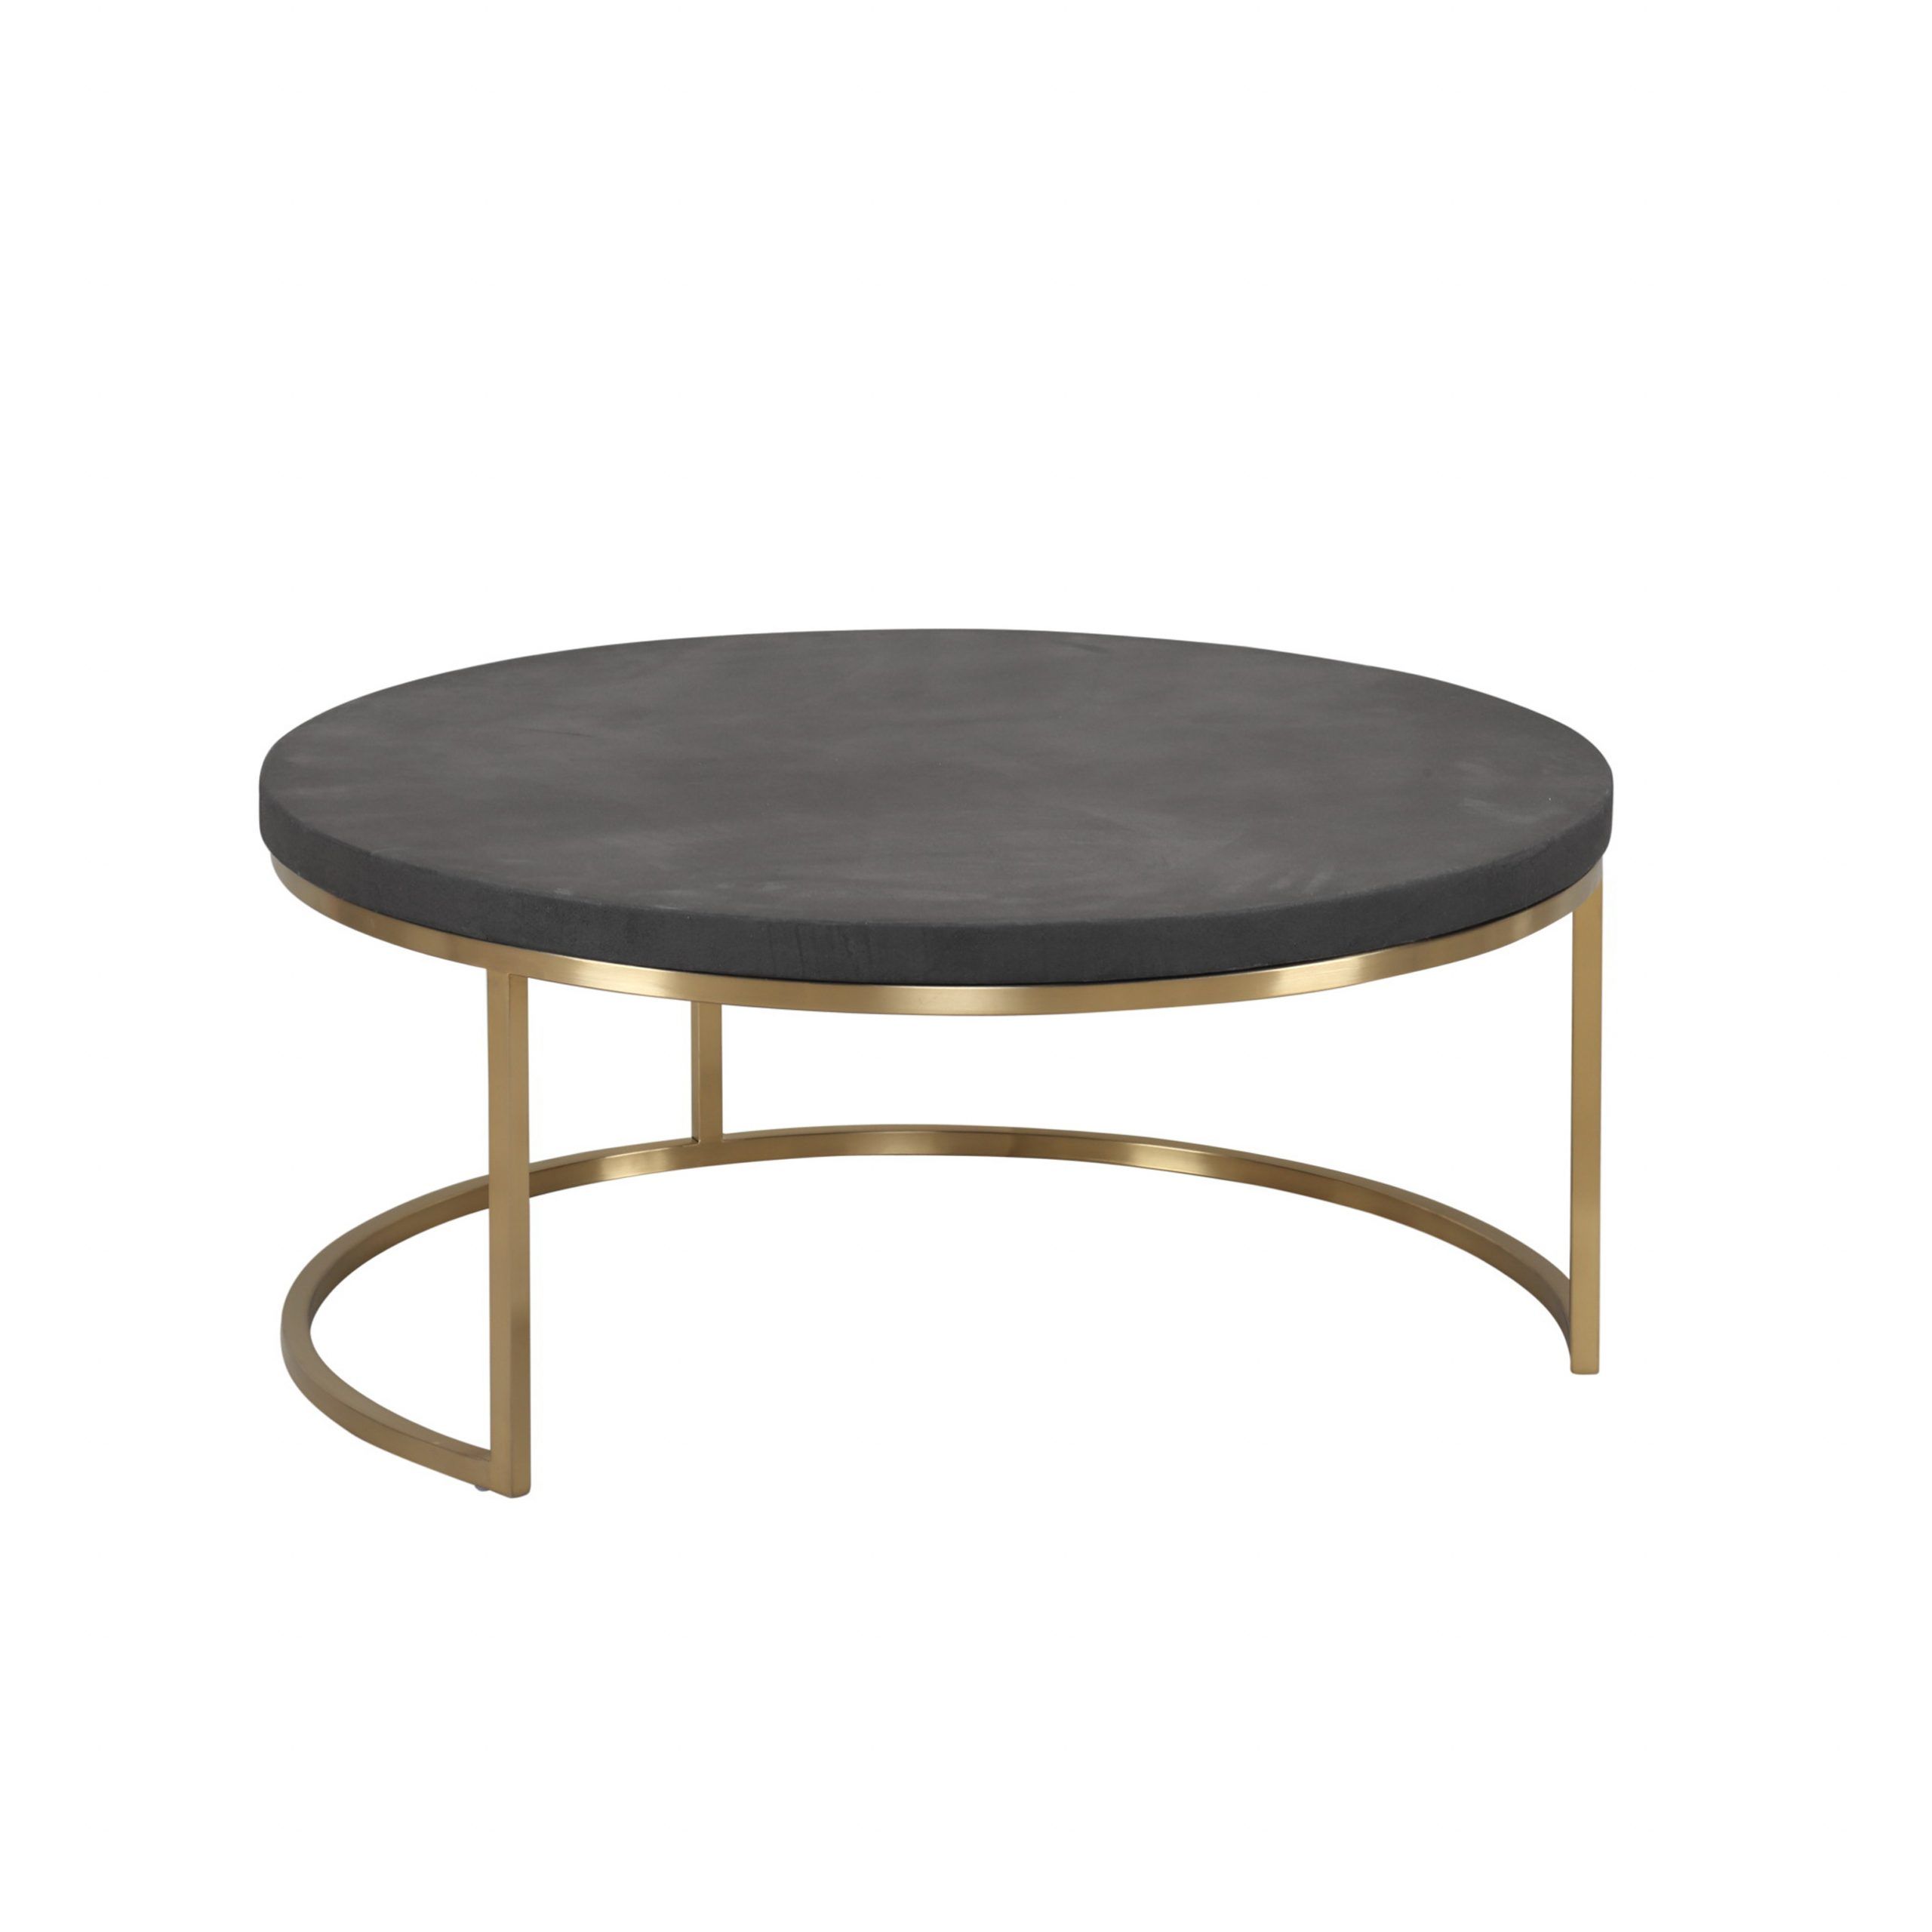 Deco 35" Round Coffee Table Black Concrete Laminate With Intended For Square Black And Brushed Gold Coffee Tables (View 9 of 15)